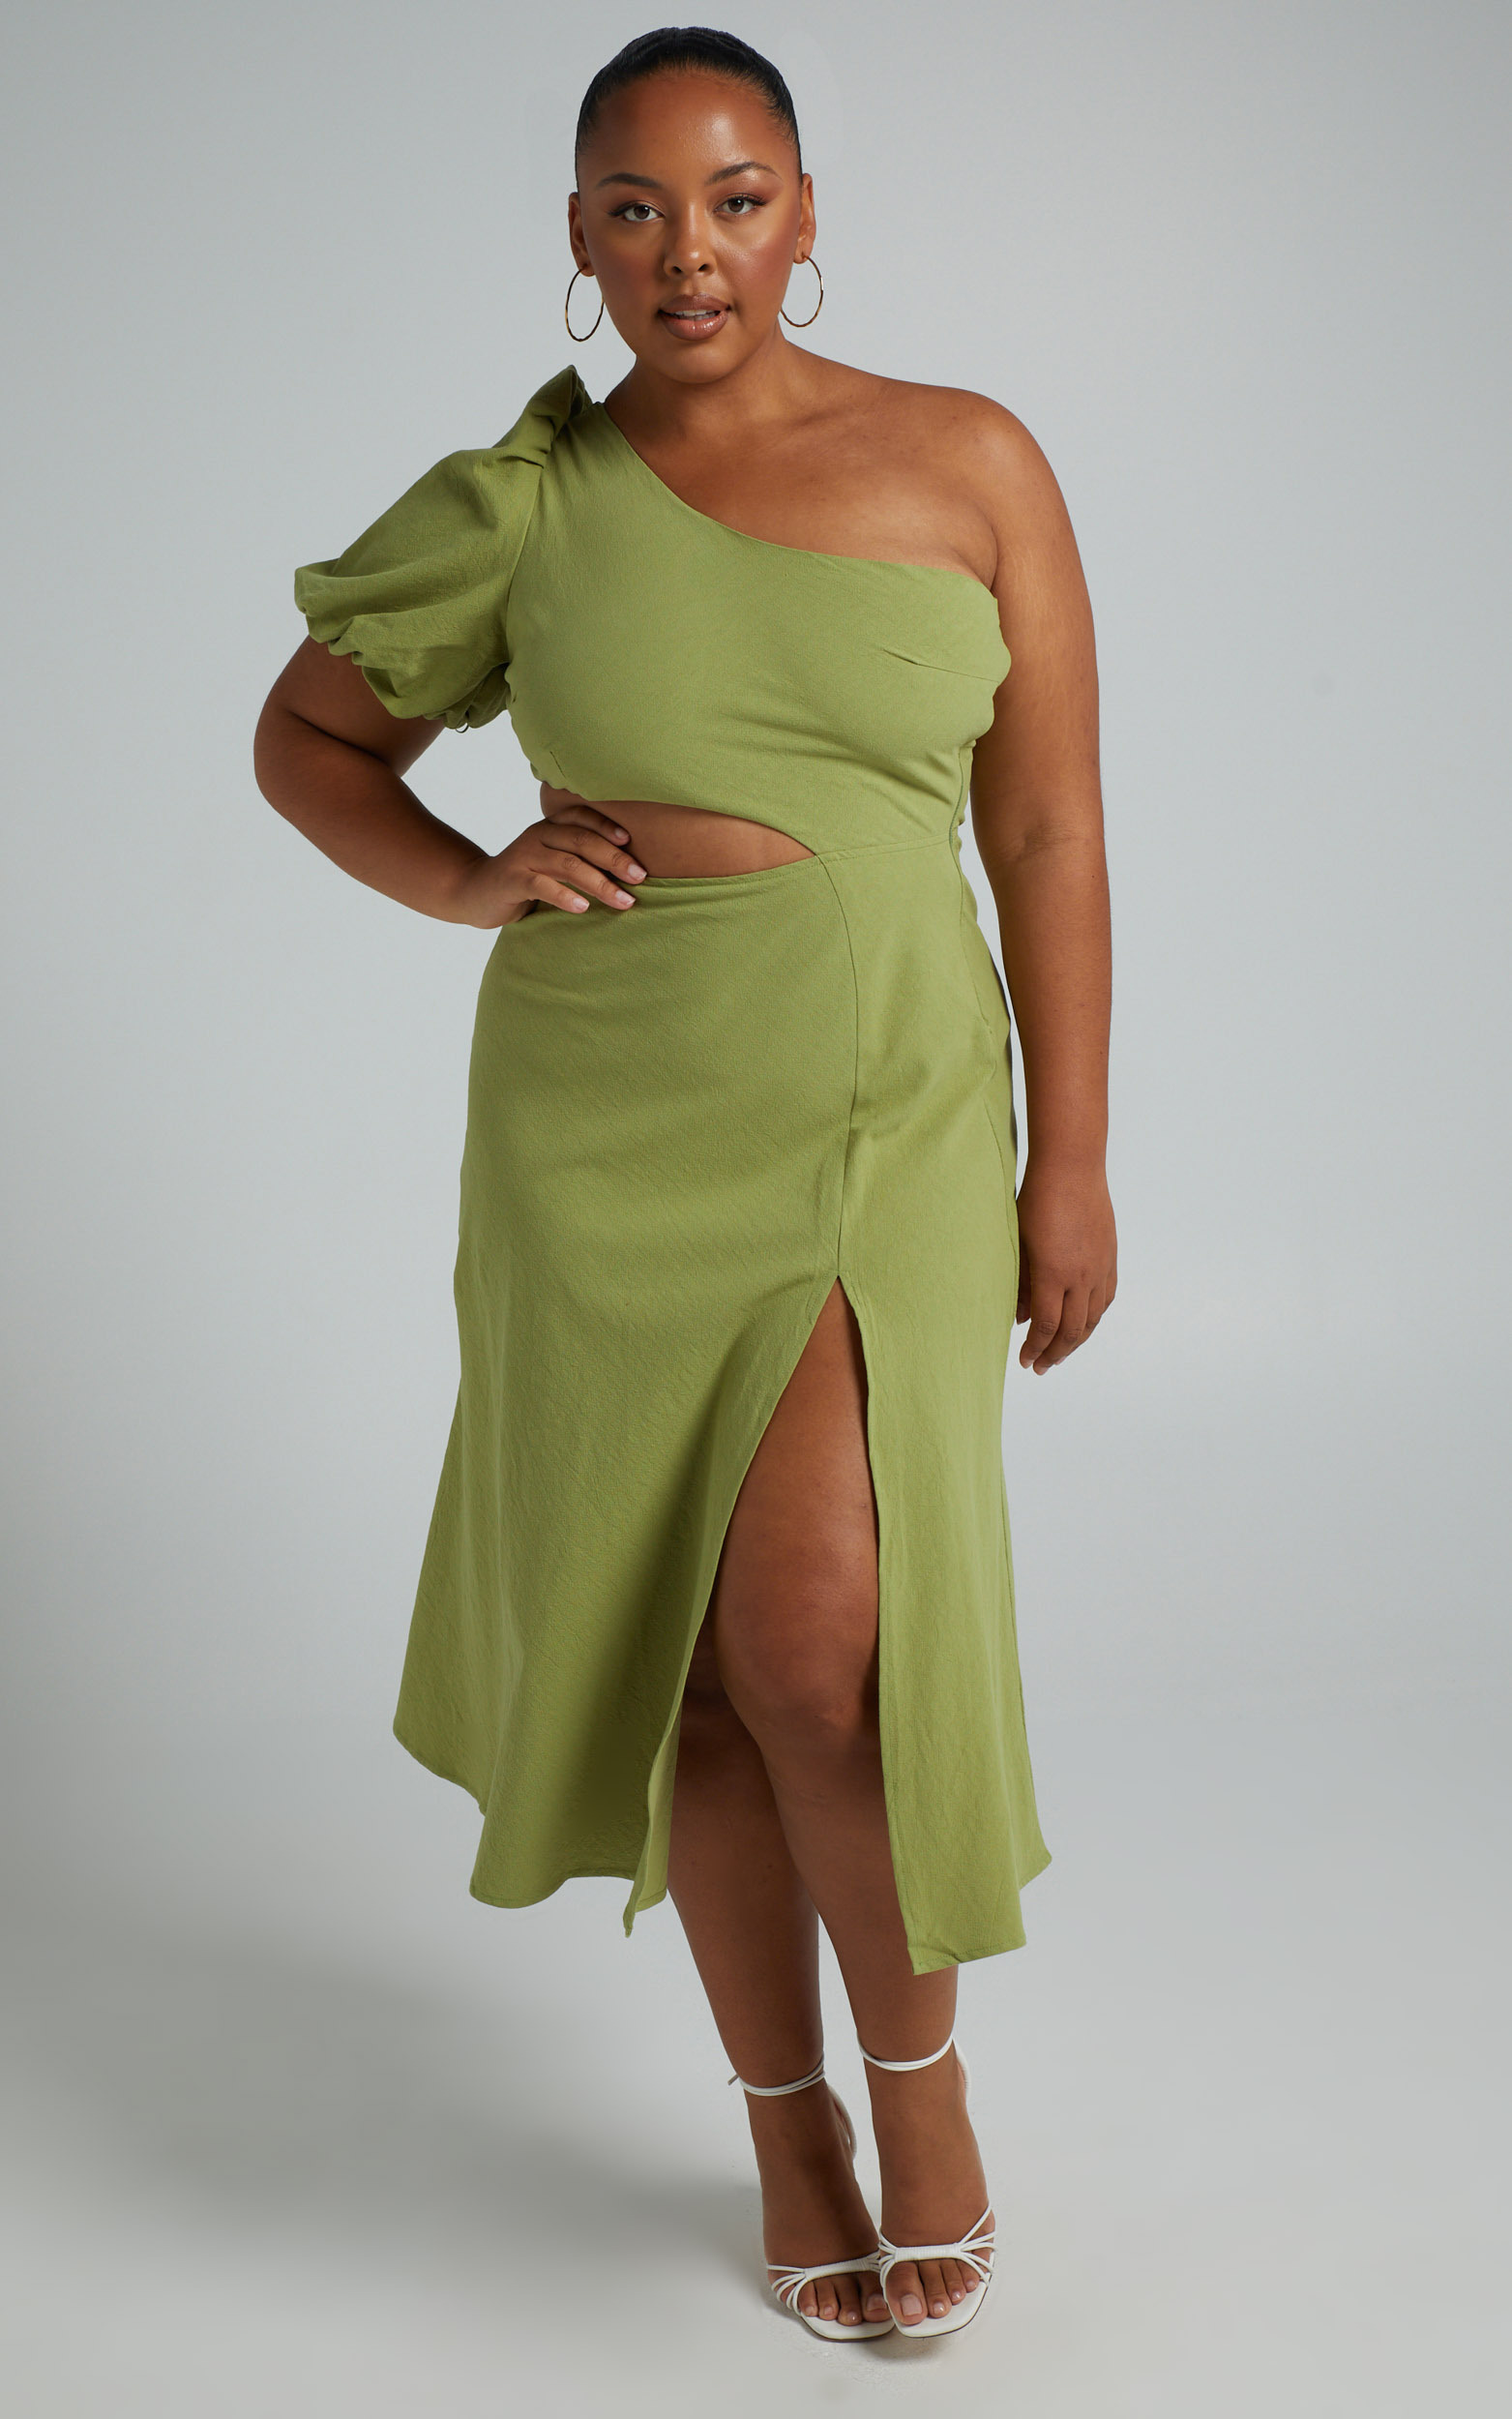 Marcia One Shoulder Midi Dress with Side Cut Out in Green Linen Look - 04, GRN3, hi-res image number null